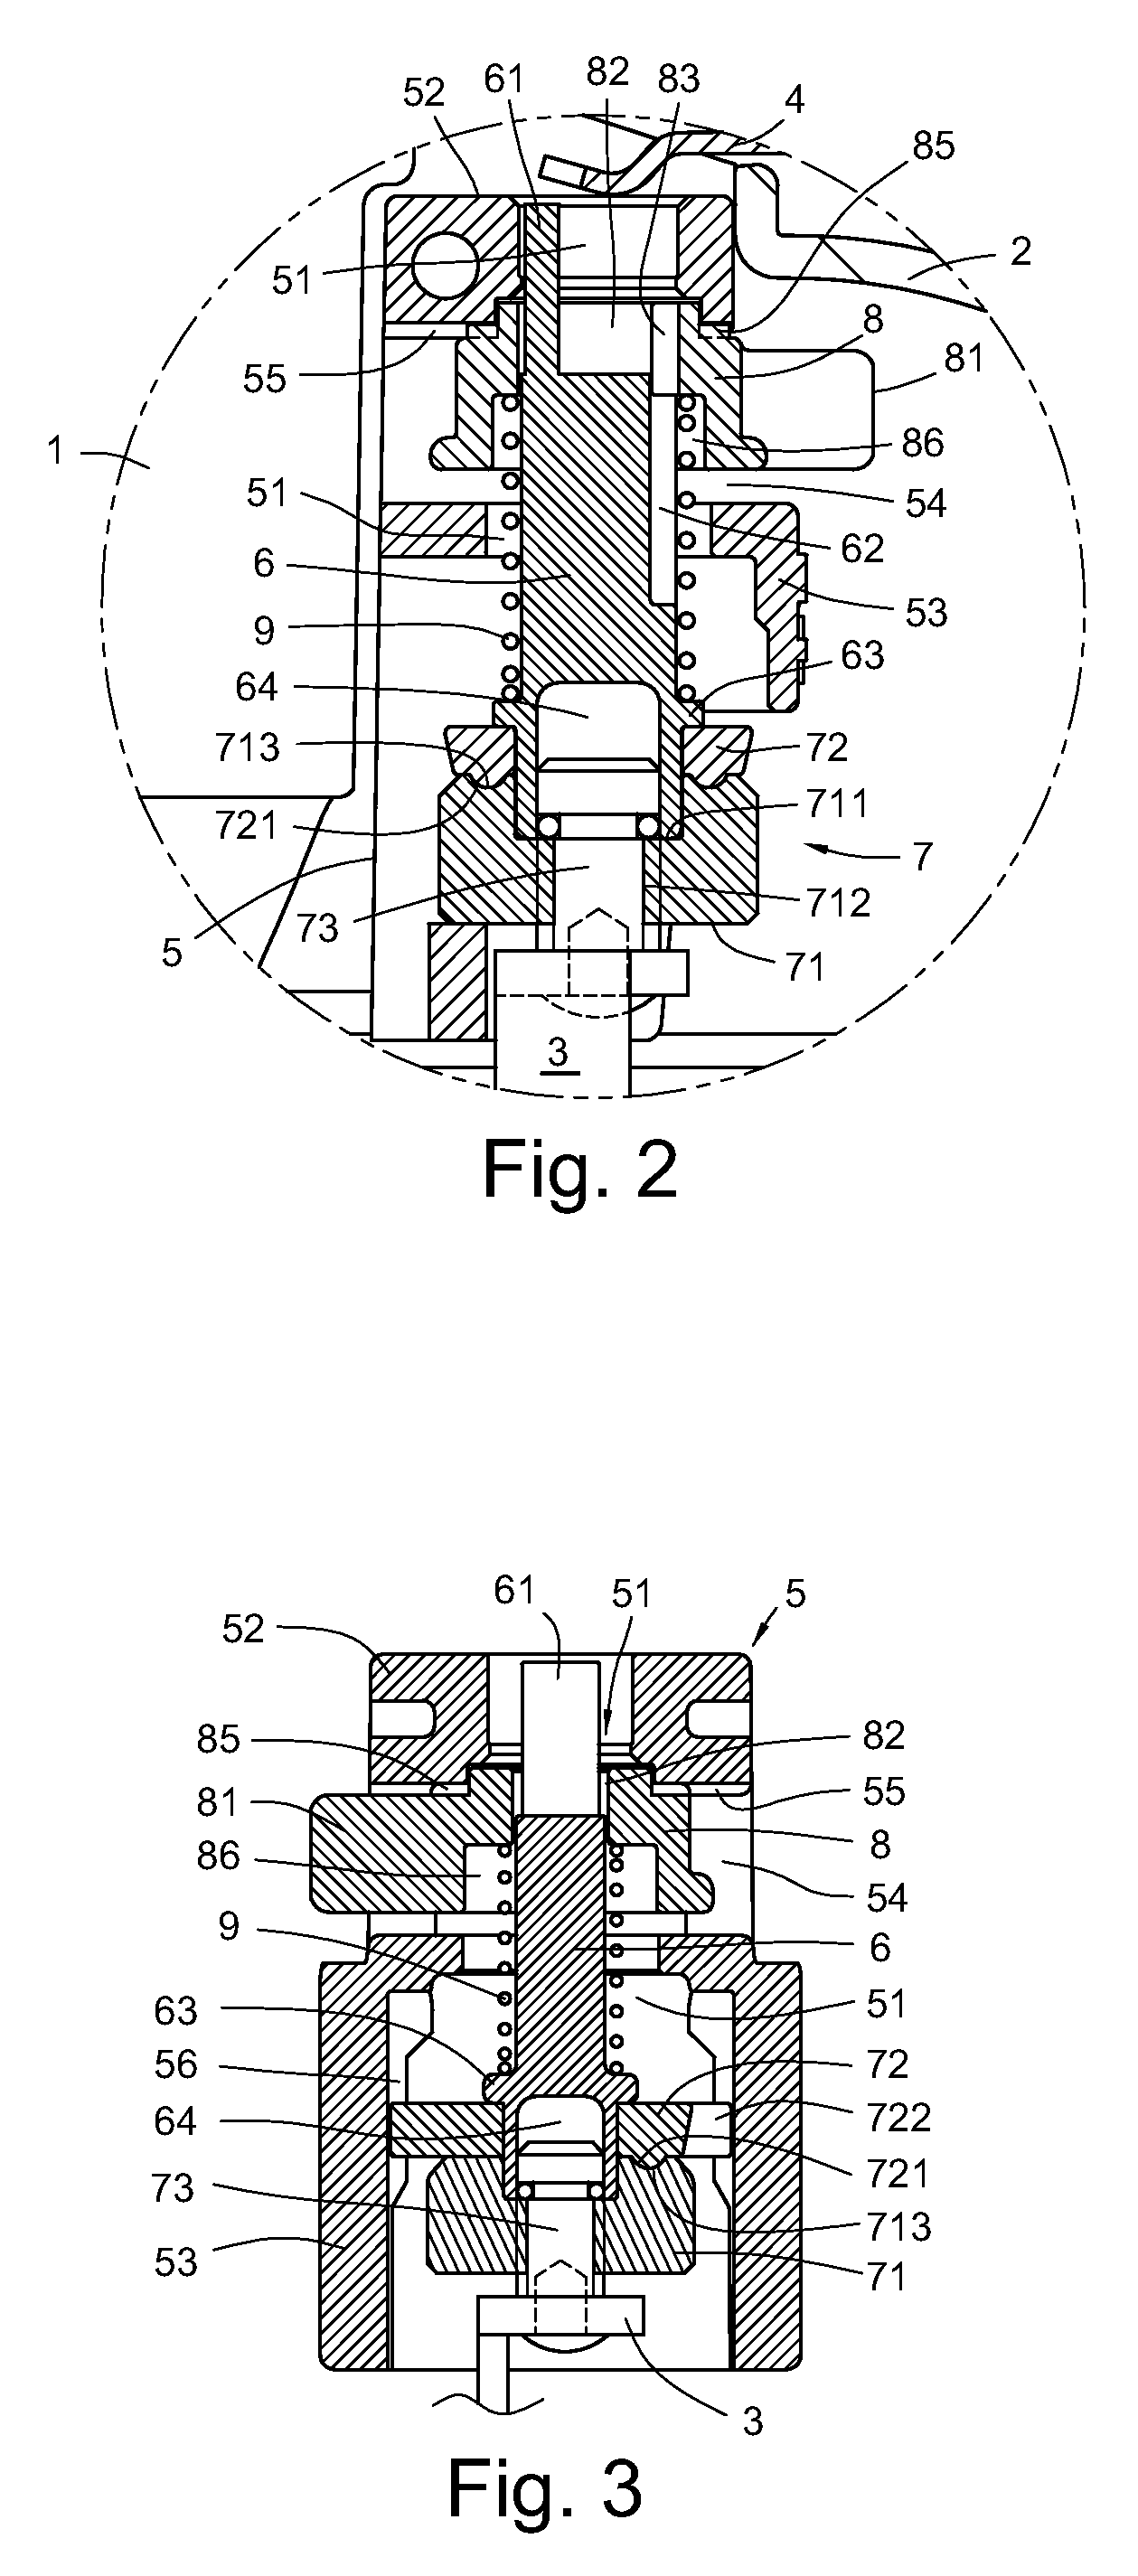 Nail gun switch mechanism for switching dual actuation modes